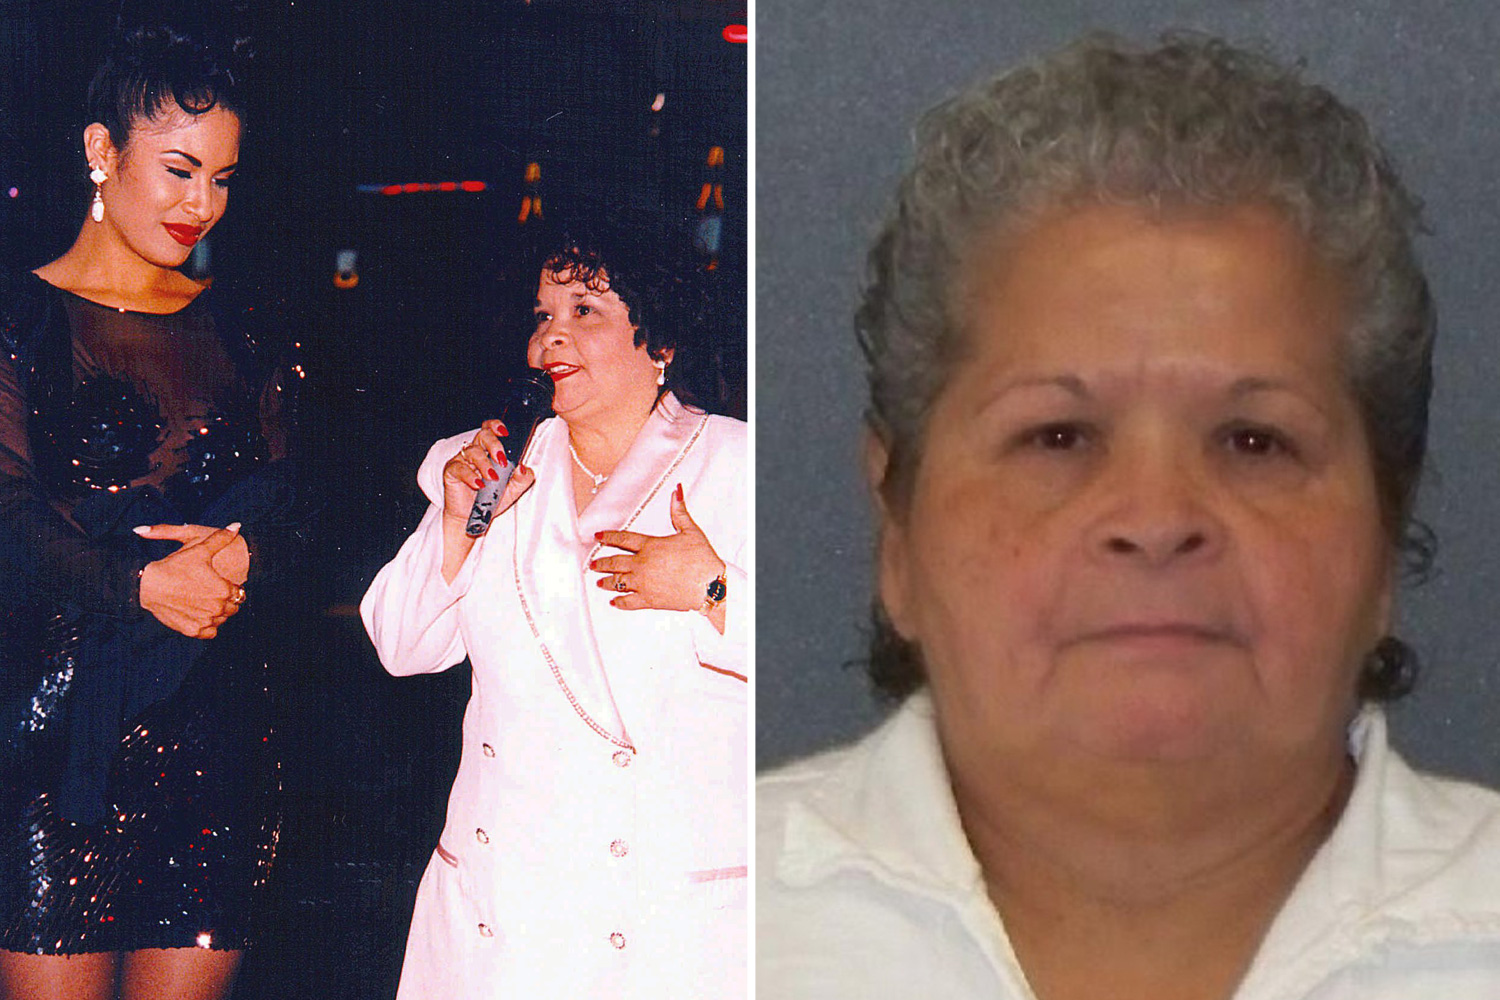 Where is Yolanda Saldivar now and when's her jail release date? The